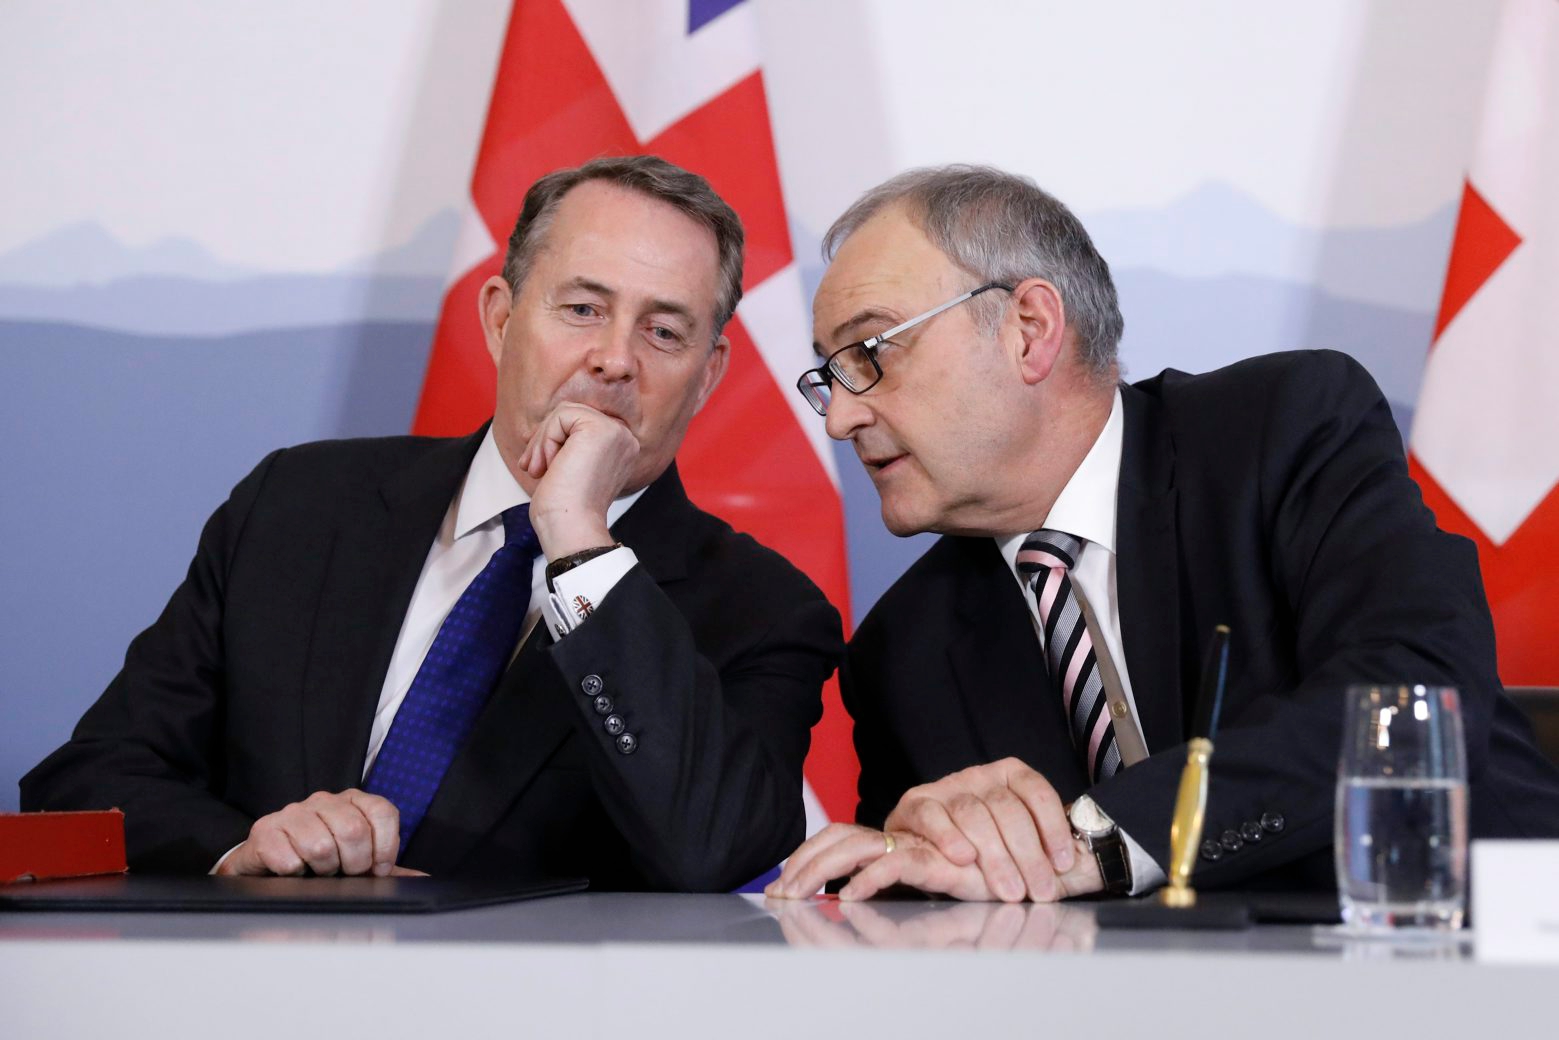 Swiss Federal Councillor Guy Parmelin, right, talks to British Secretary of State for International Trade Liam Fox, left, after signing a trade agreement in Bern, Switzerland, Monday, February 11, 2019. Parmelin and Fox signed a bilateral trade agreement regulating relations between the two countries after the Brexit. Because of the customs treaty with Switzerland, the agreement also applies to Liechtenstein. (KEYSTONE/Peter Klaunzer) SWITZERLAND UNITED KINGDOM LIECHTENSTEIN TRADE AGREEMENT